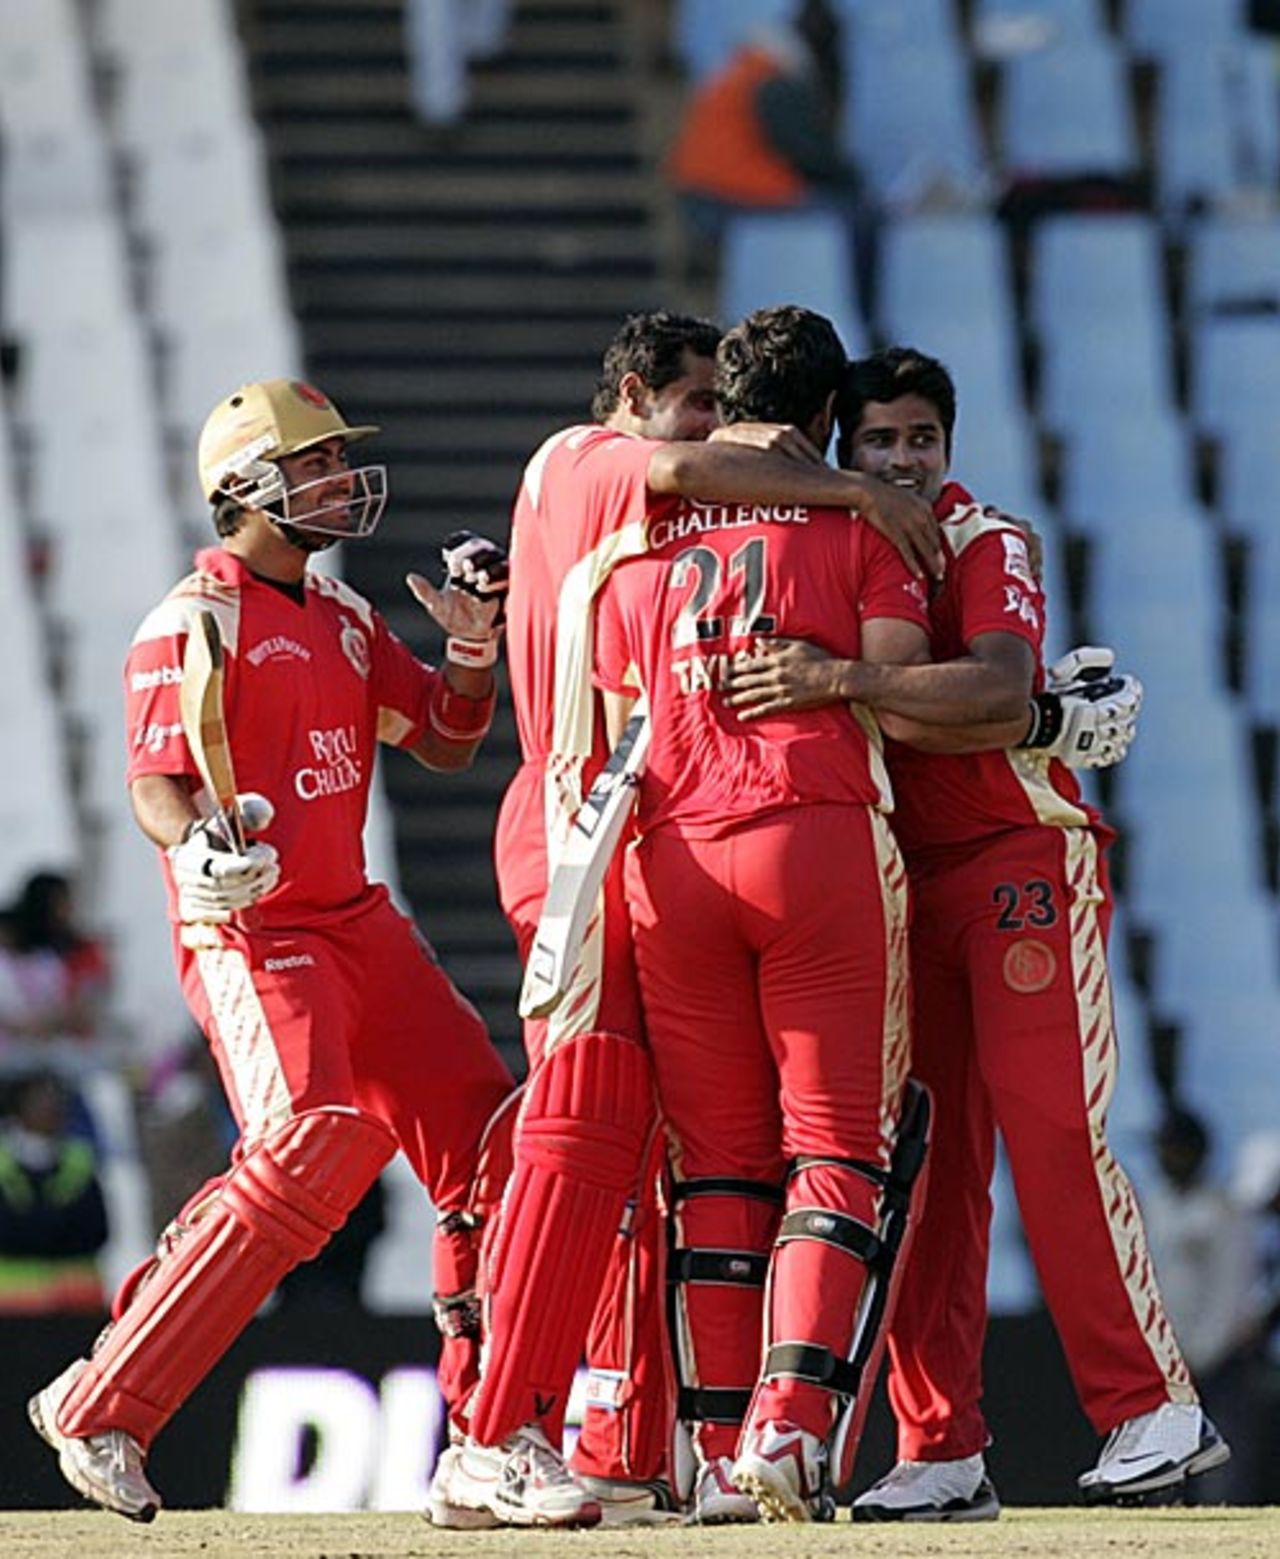 Ross Taylor is mobbed by his team-mates after leading his team to a tense win, Kolkata Knight Riders v Royal Challengers Bangalore, IPL, Centurion, May 12, 2009